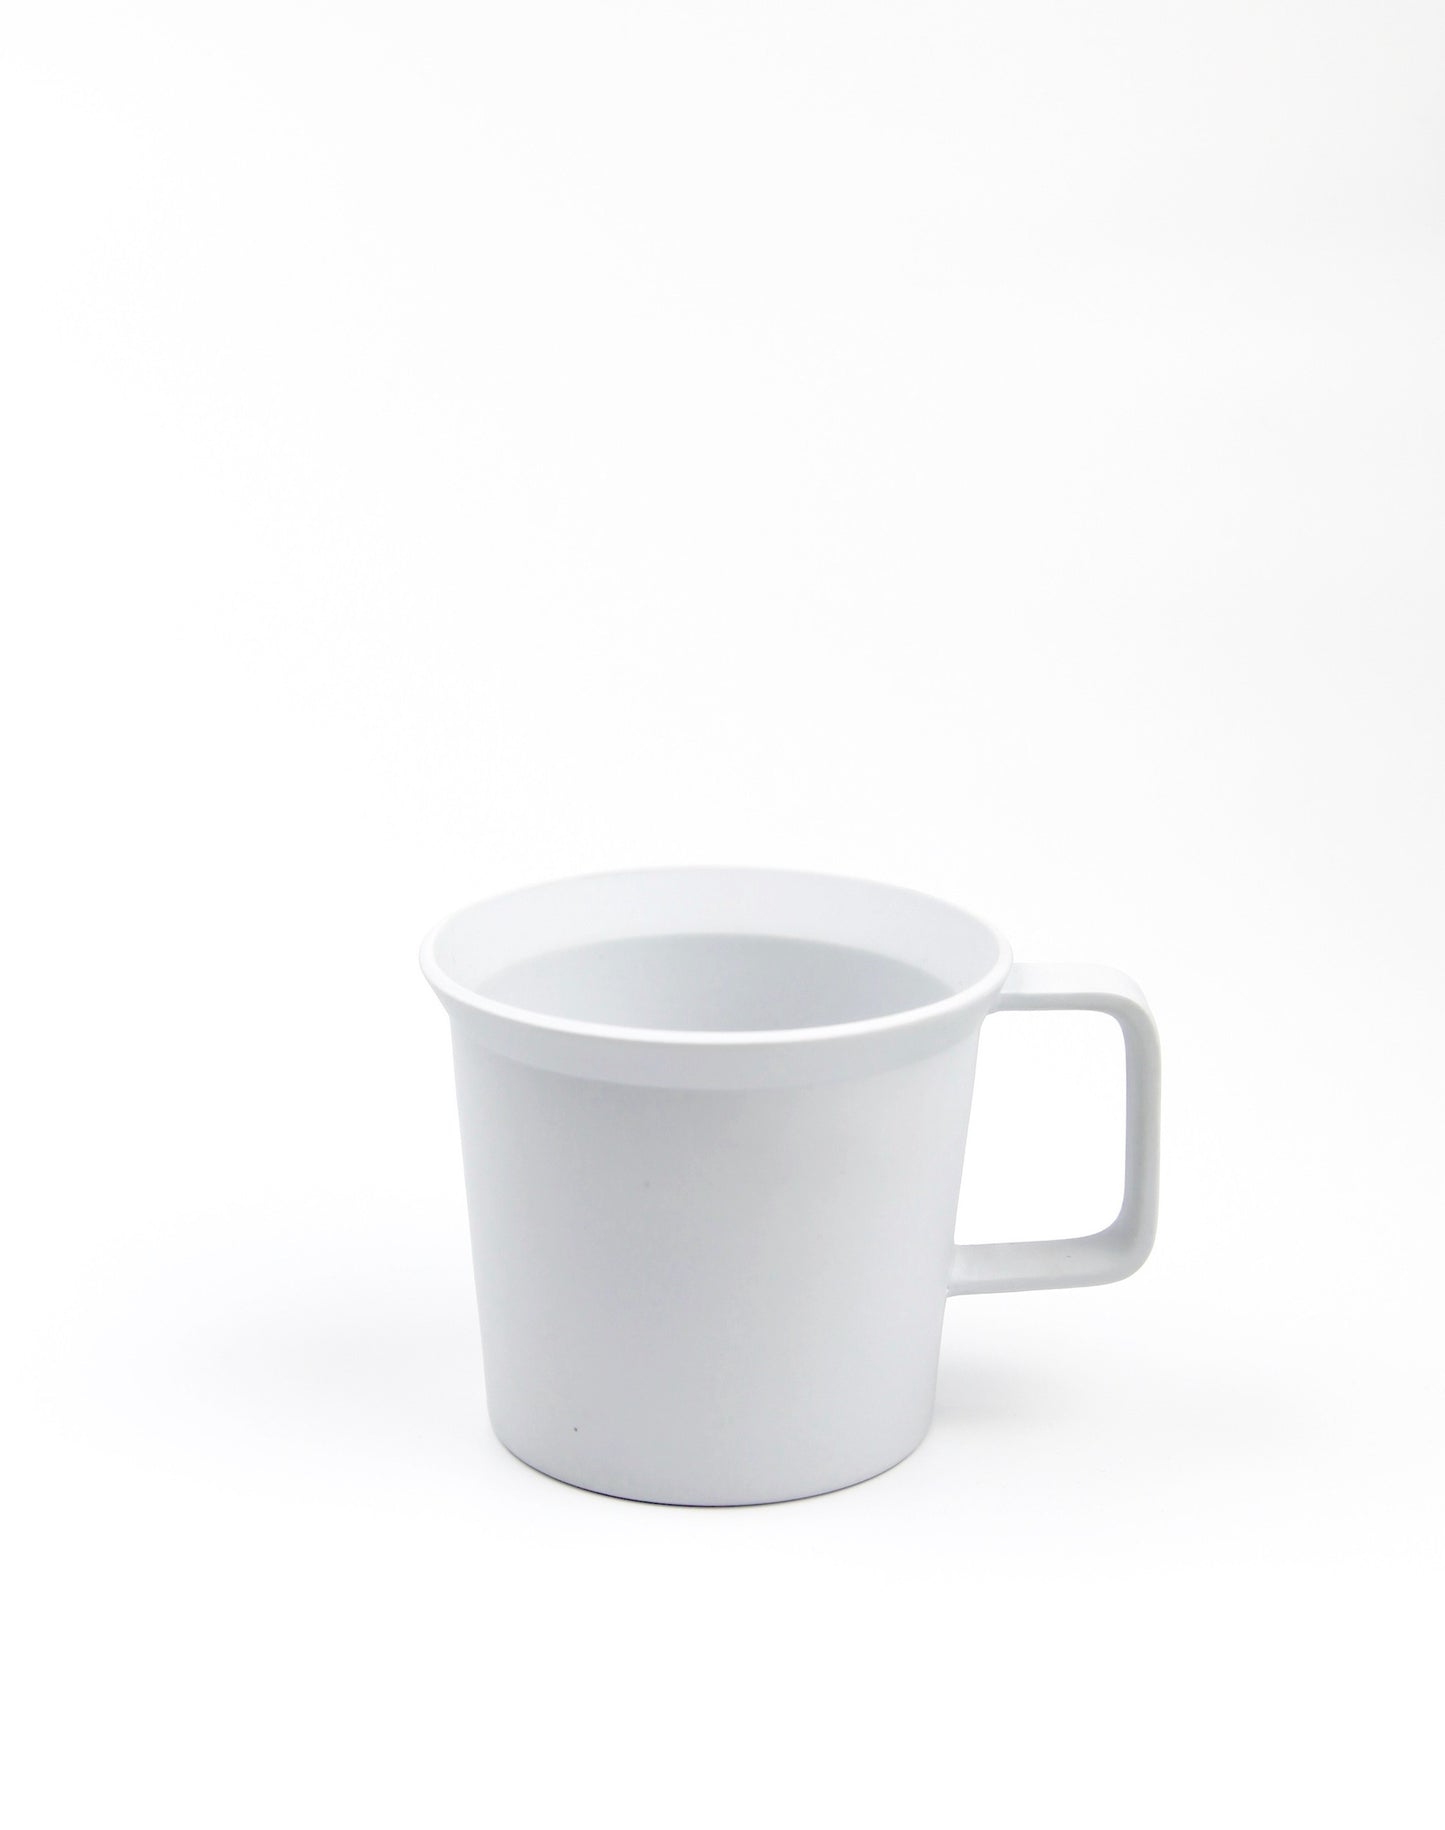 TY Coffee Cup gray - MONOLAB